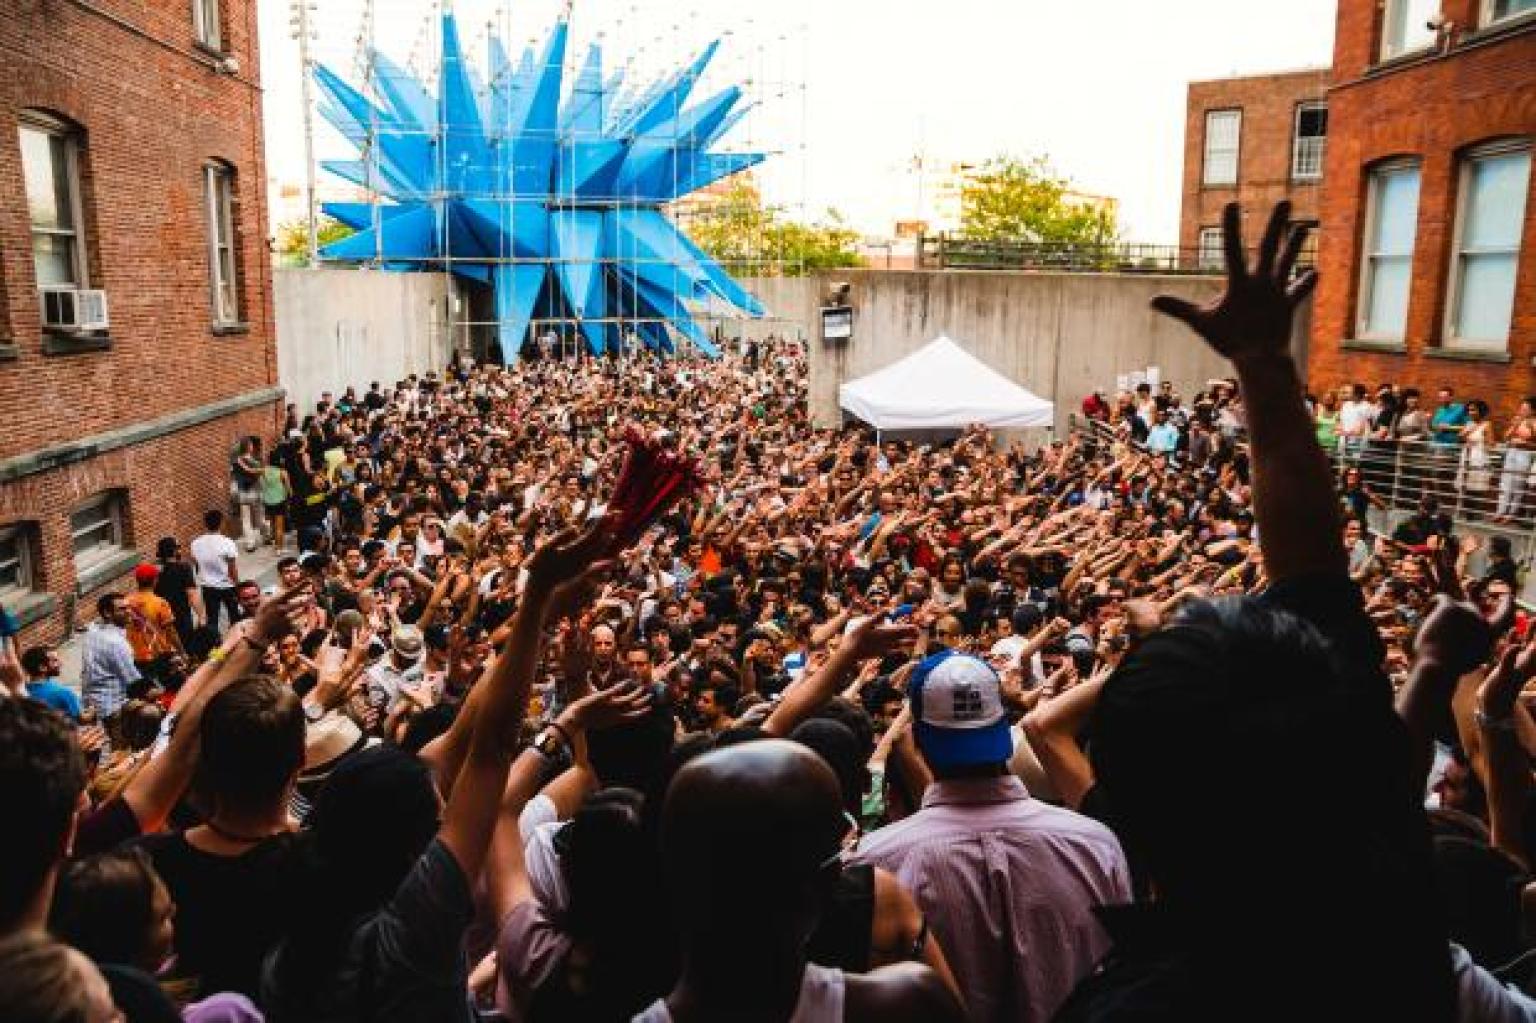 'Warm Up' Summer Dance Parties Return To MoMA PS1 This Weekend HuffPost